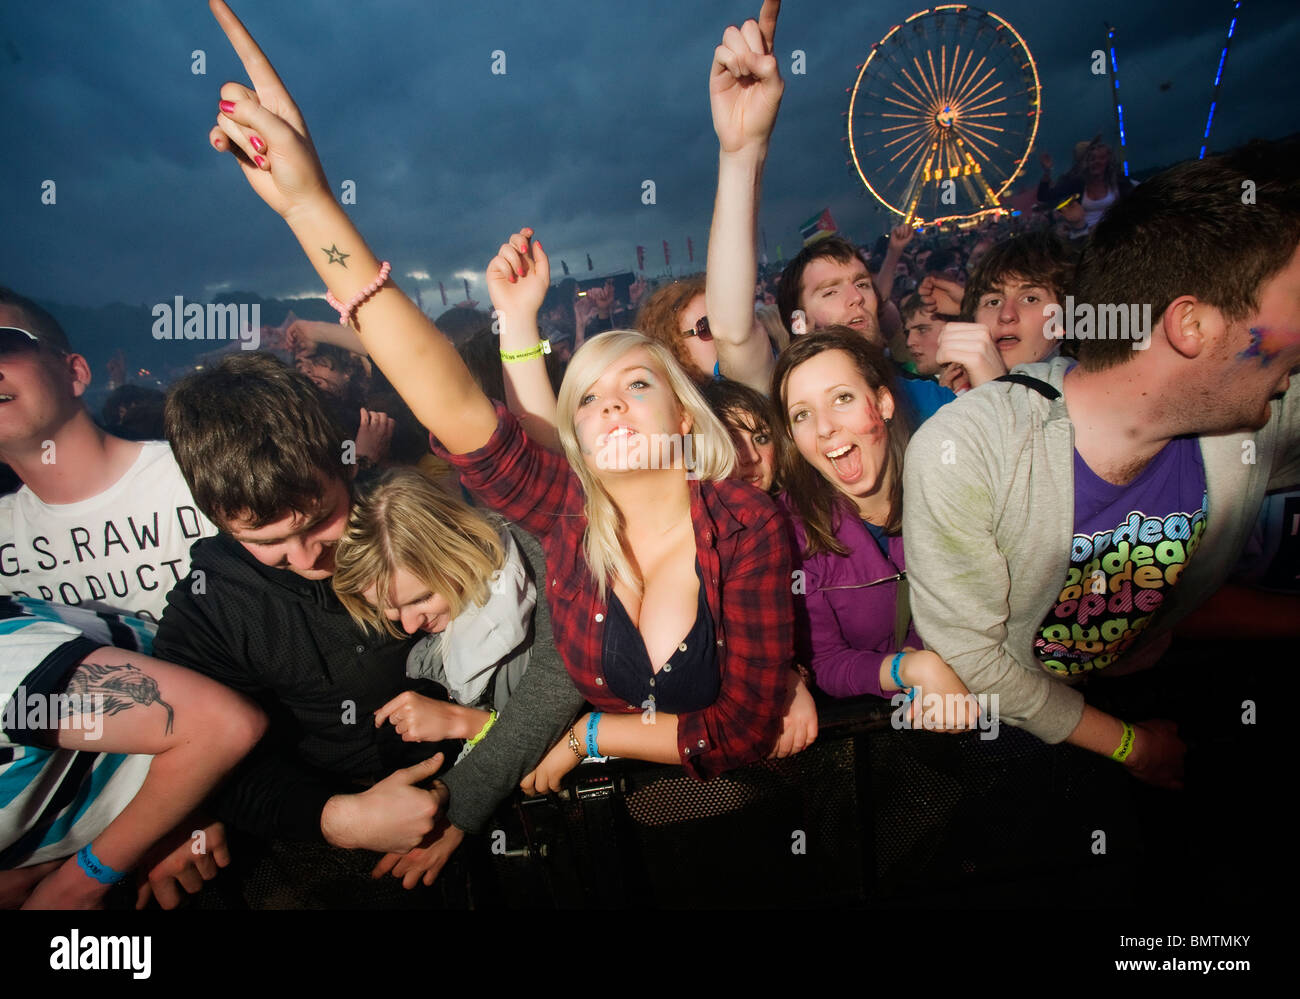 FestivaL goers at the Rockness music festival. Stock Photo